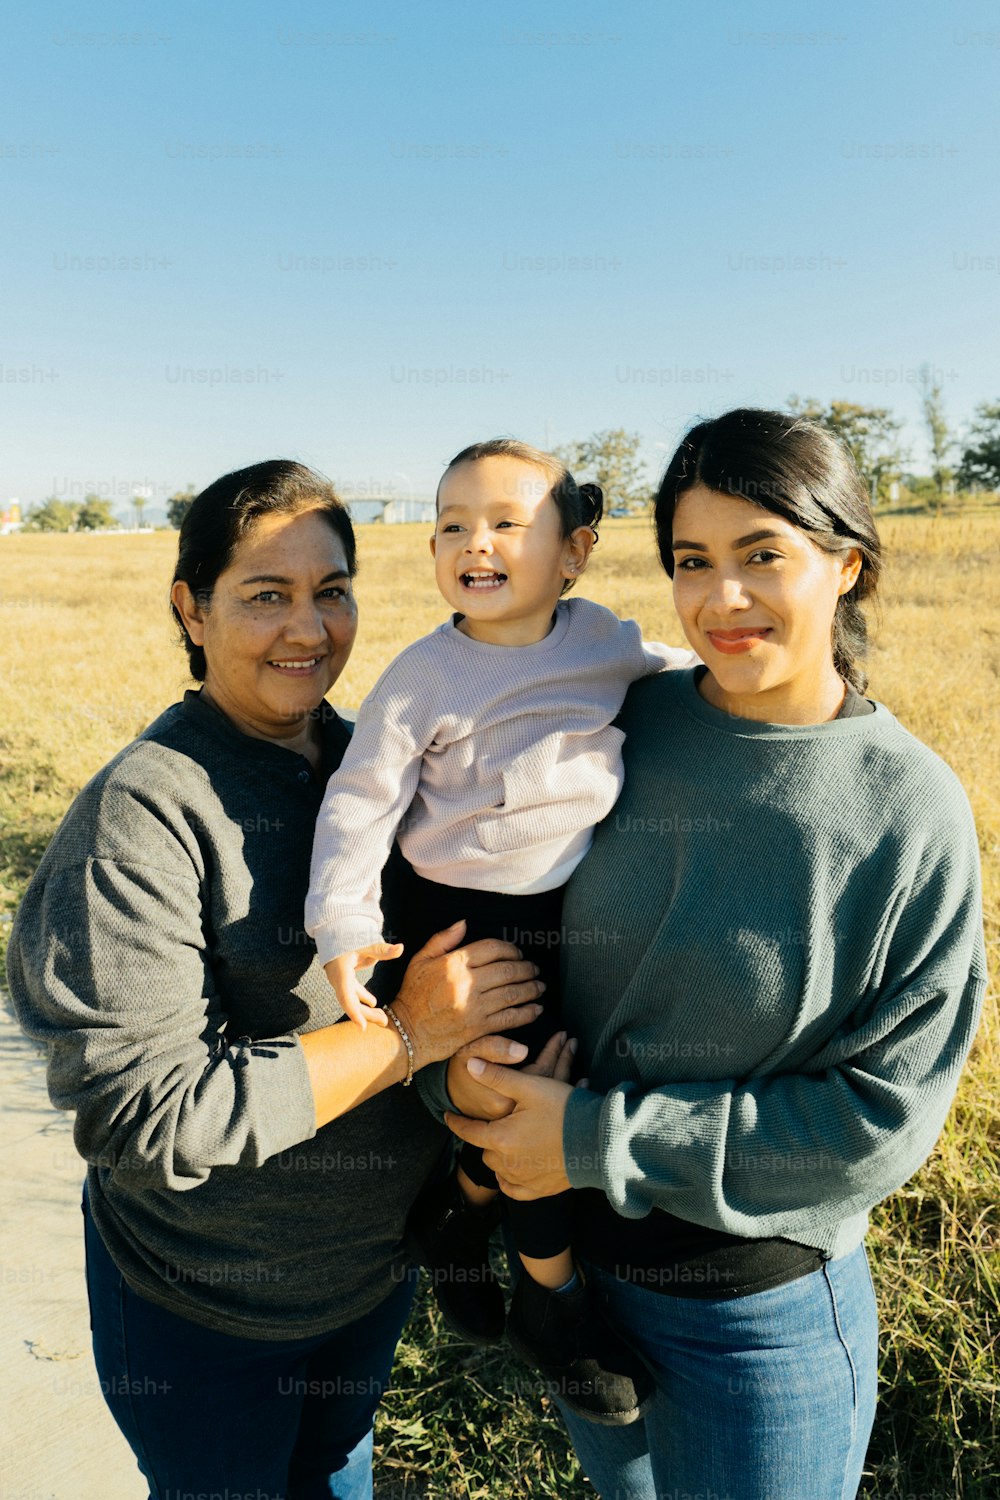 a woman holding a baby standing next to a woman